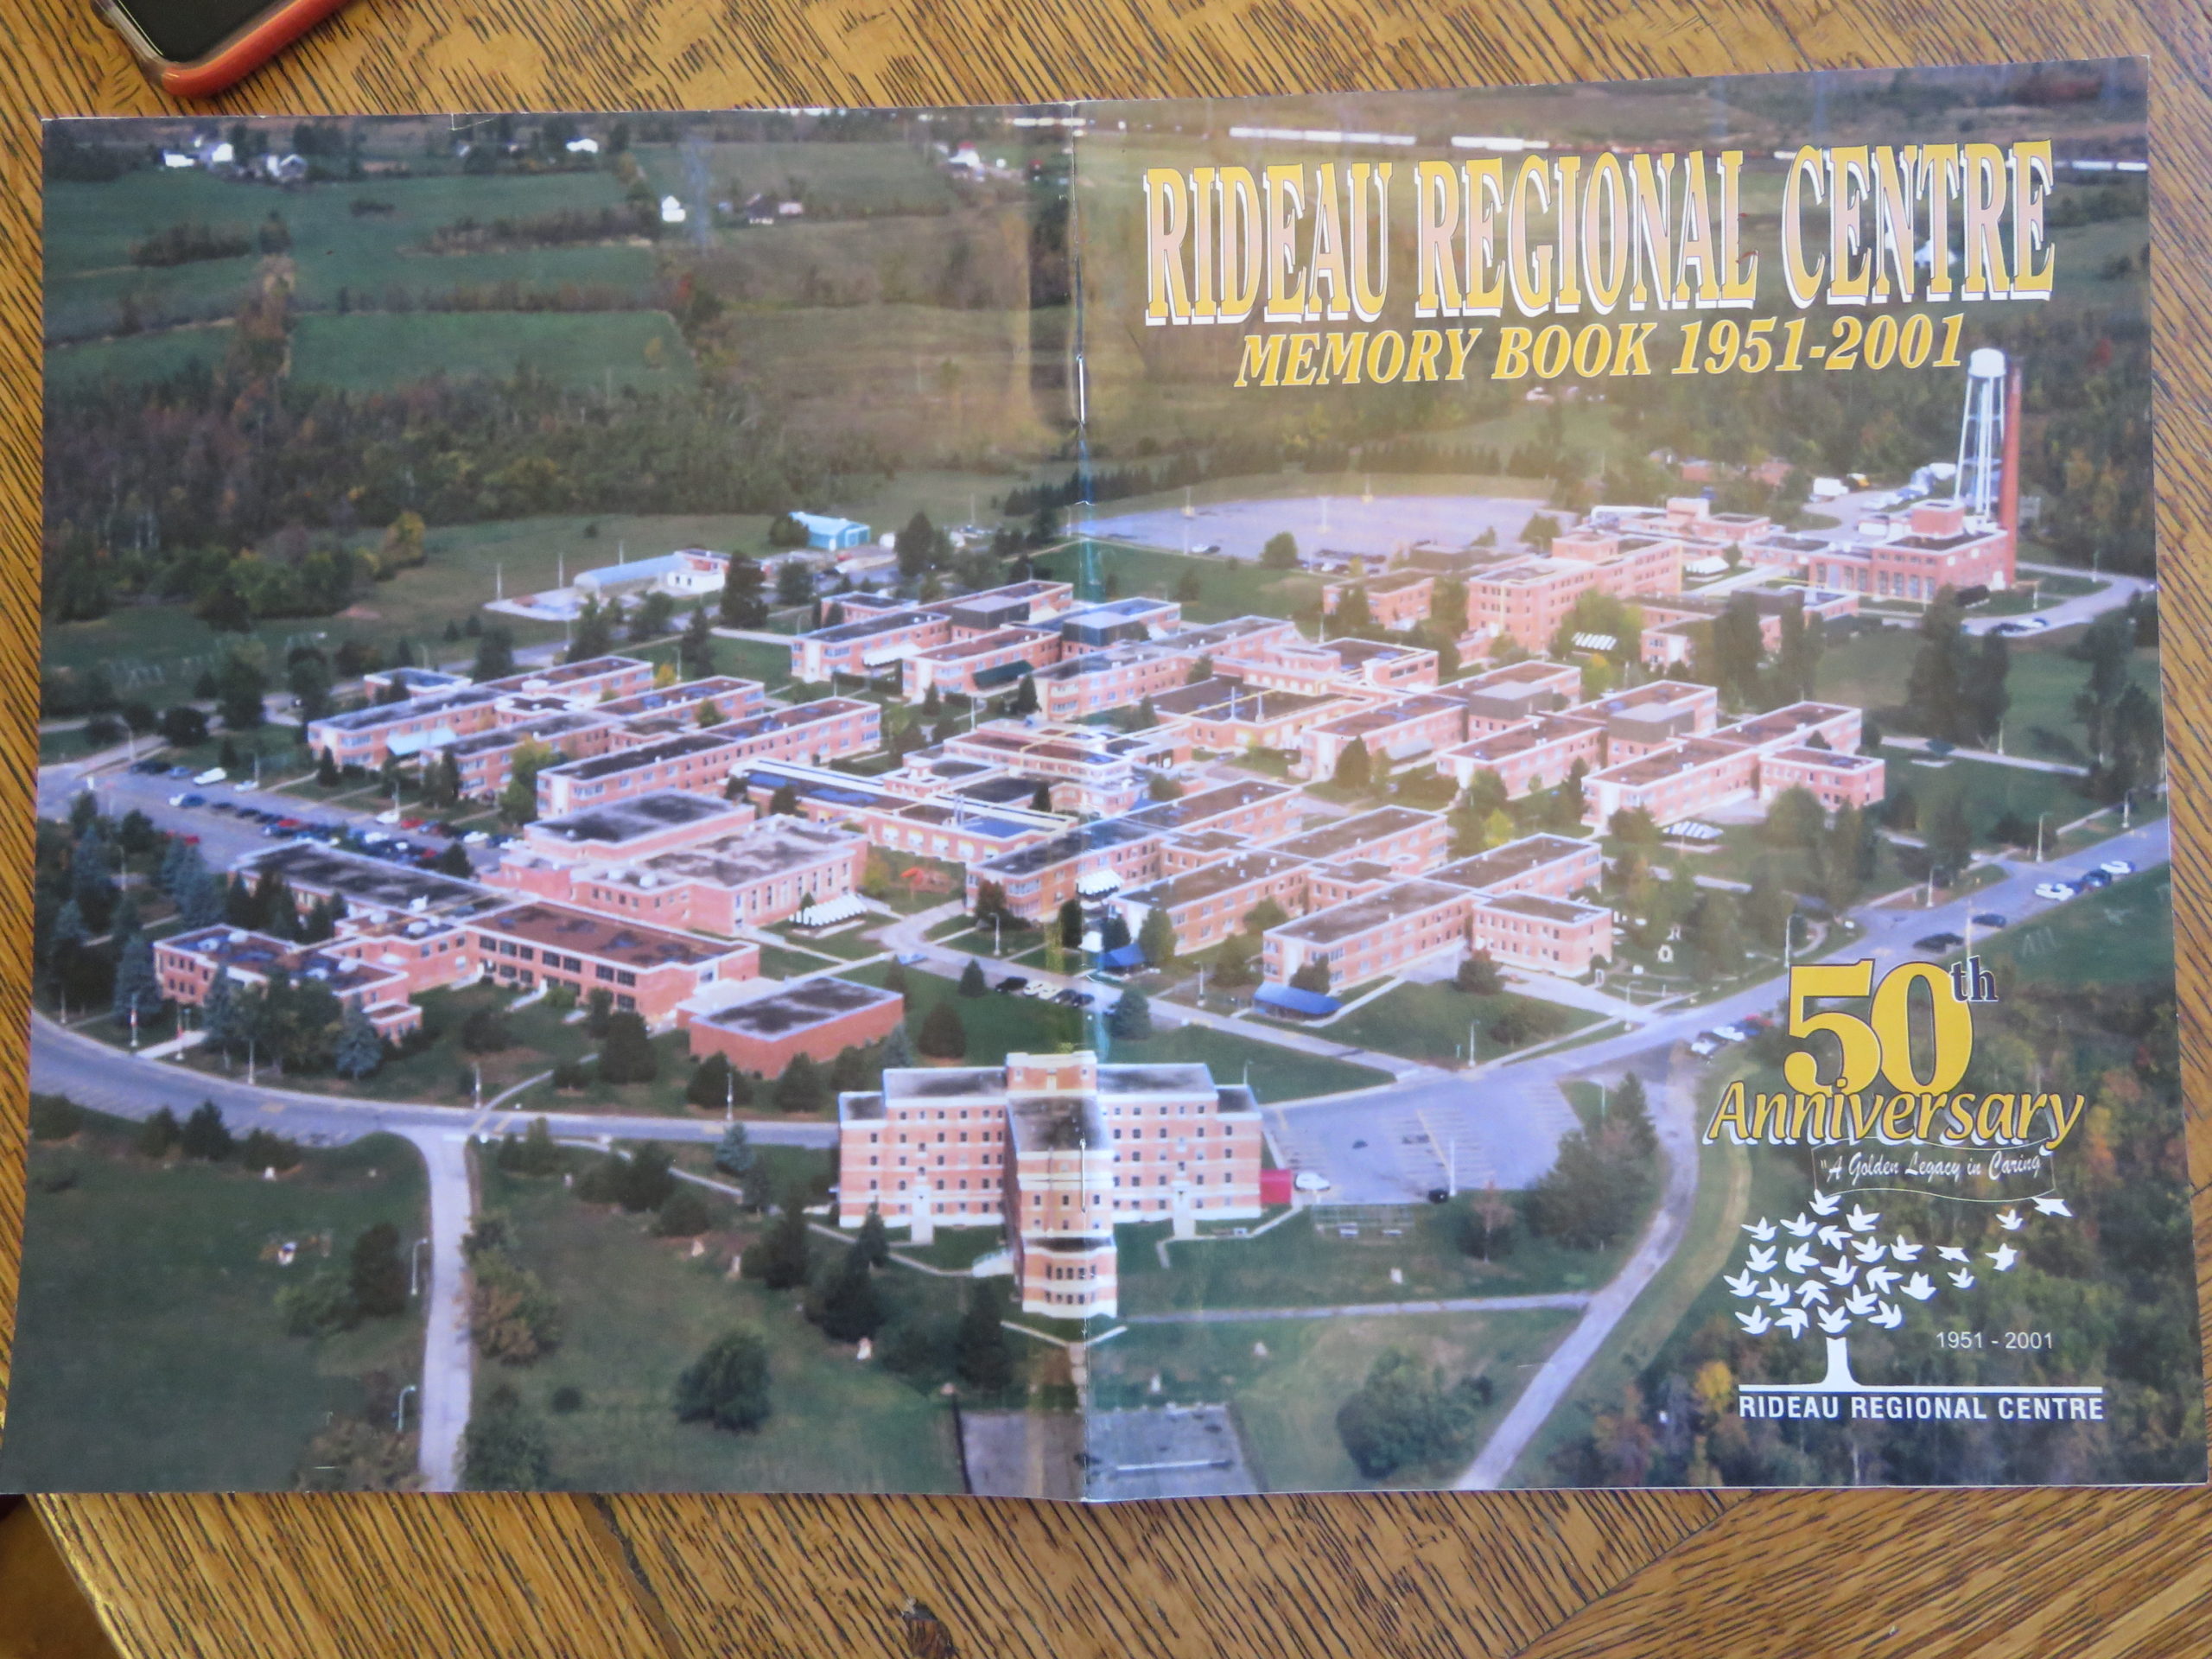 An a pamphlet celebrates the 50th anniversary of the Rideau Regional Centre.